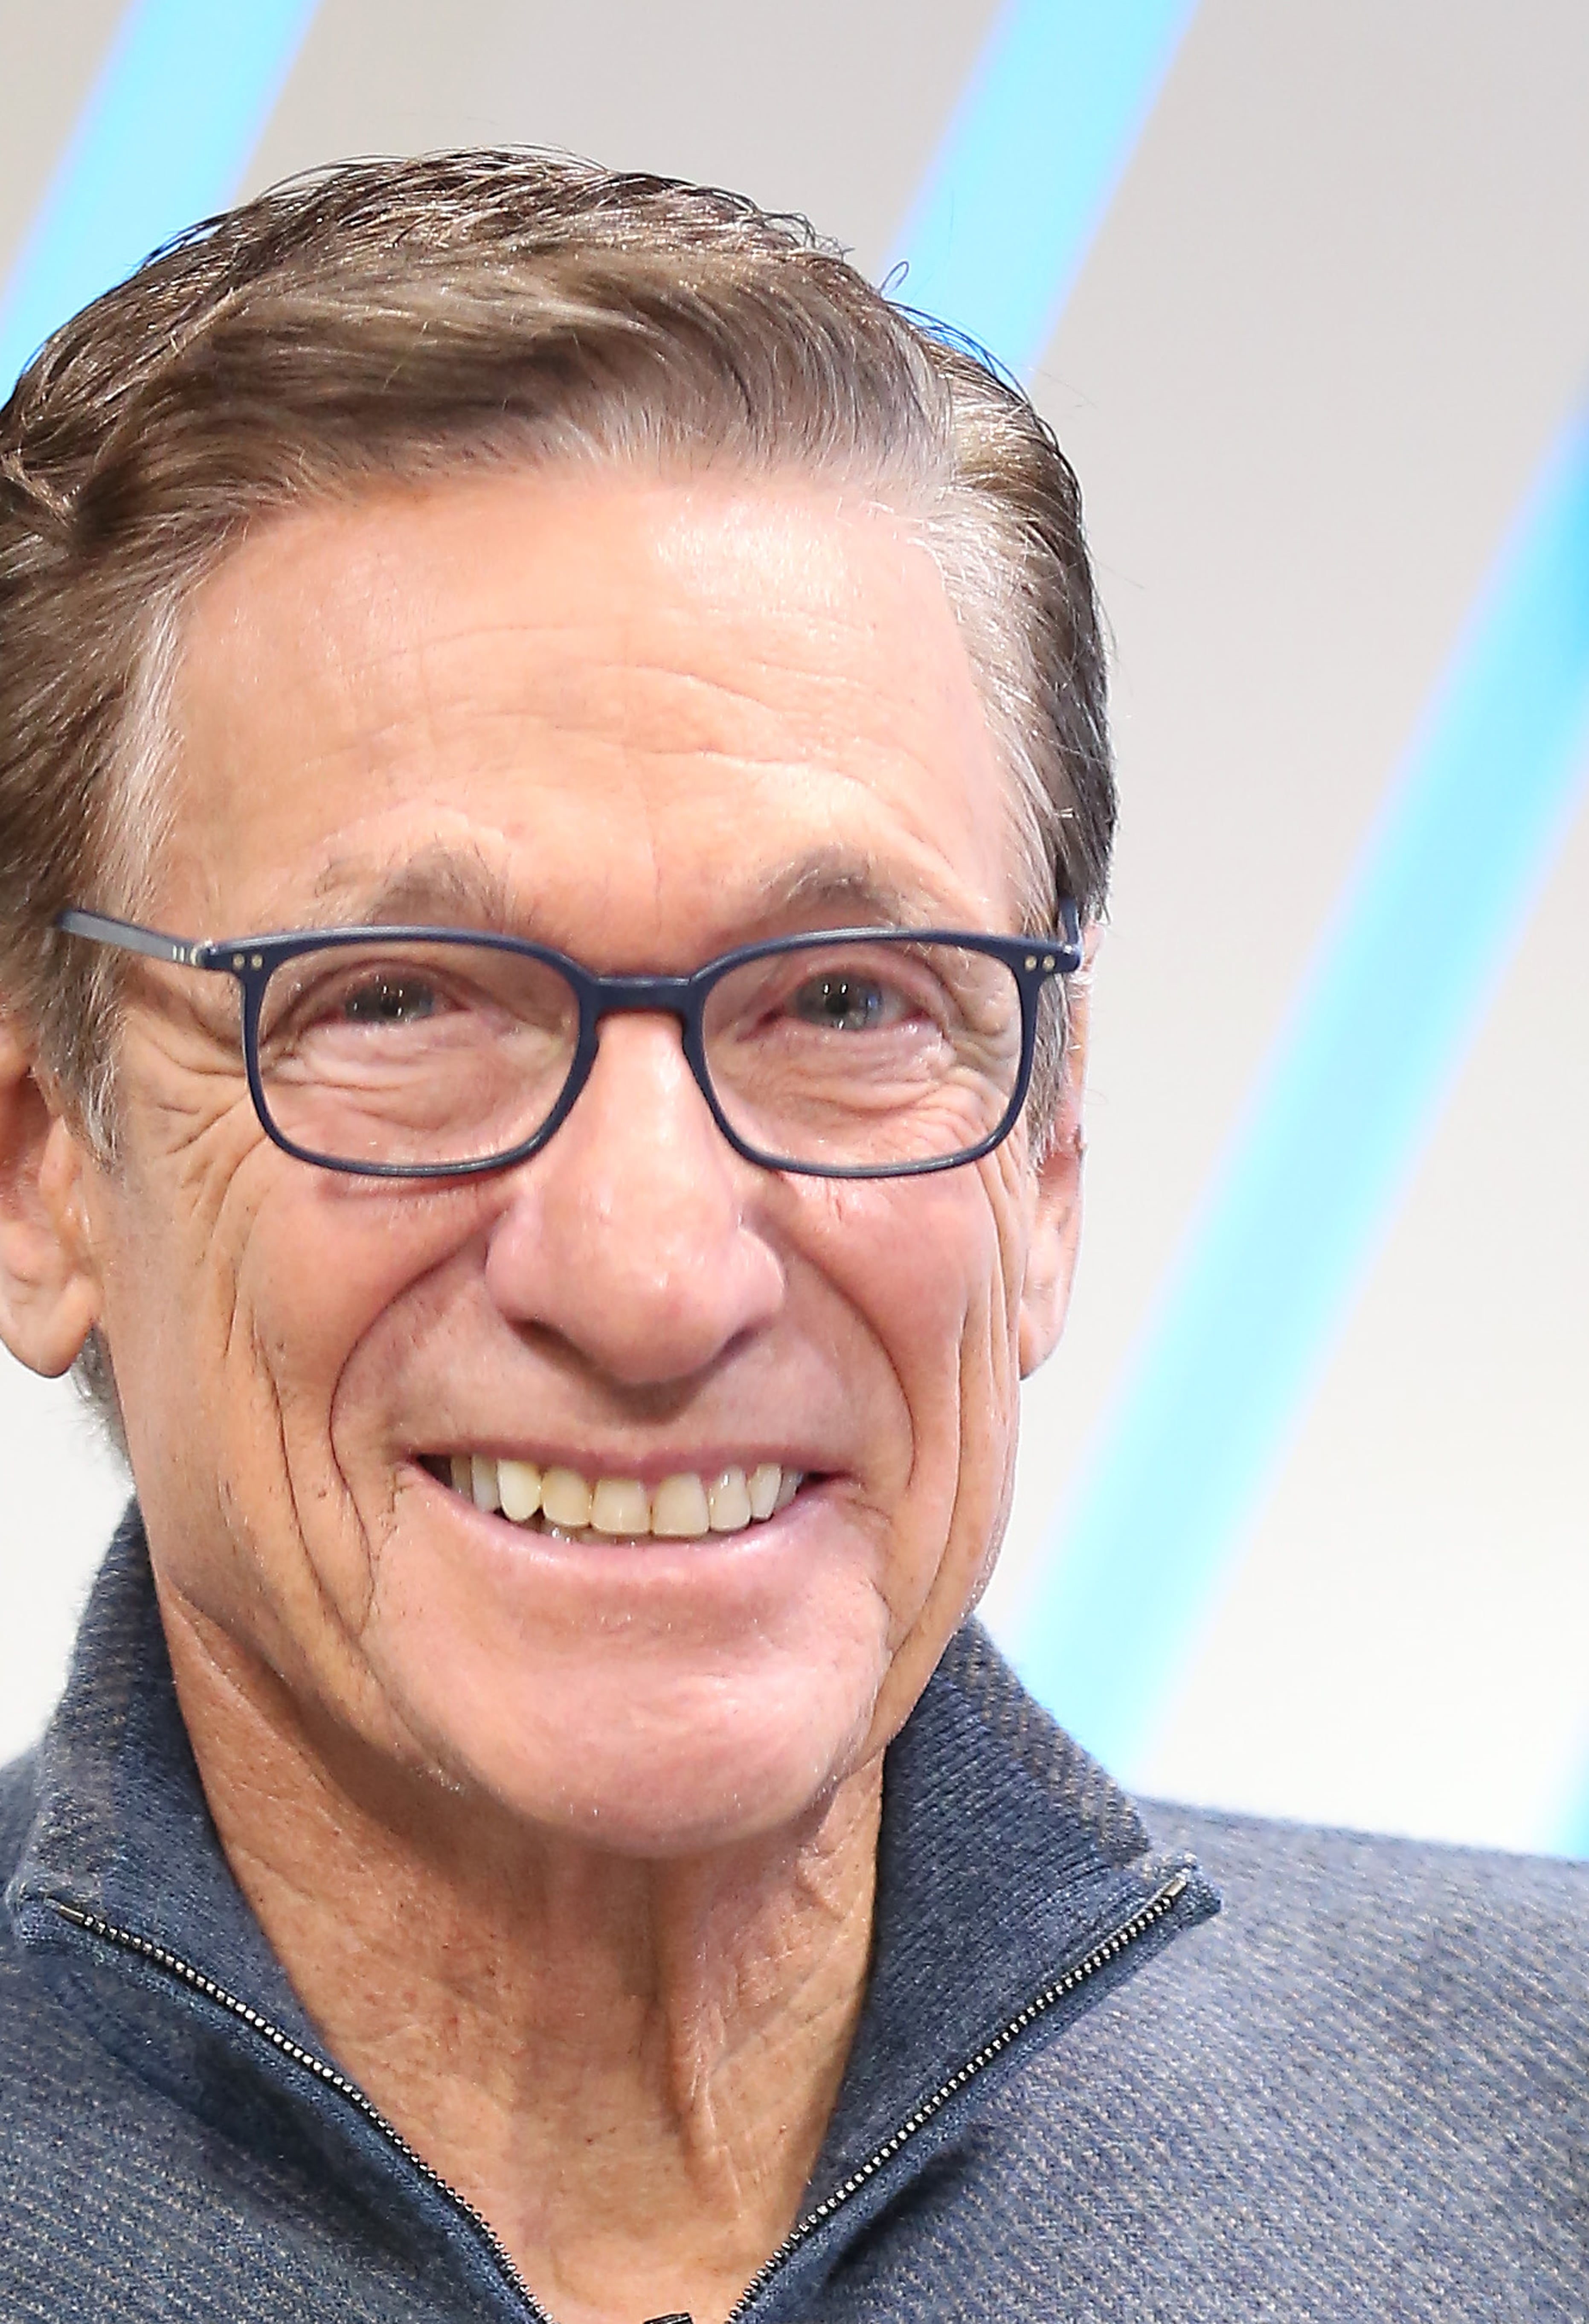 Maury Povich Created an At-Home DNA Test, and Can You Guess the Name?